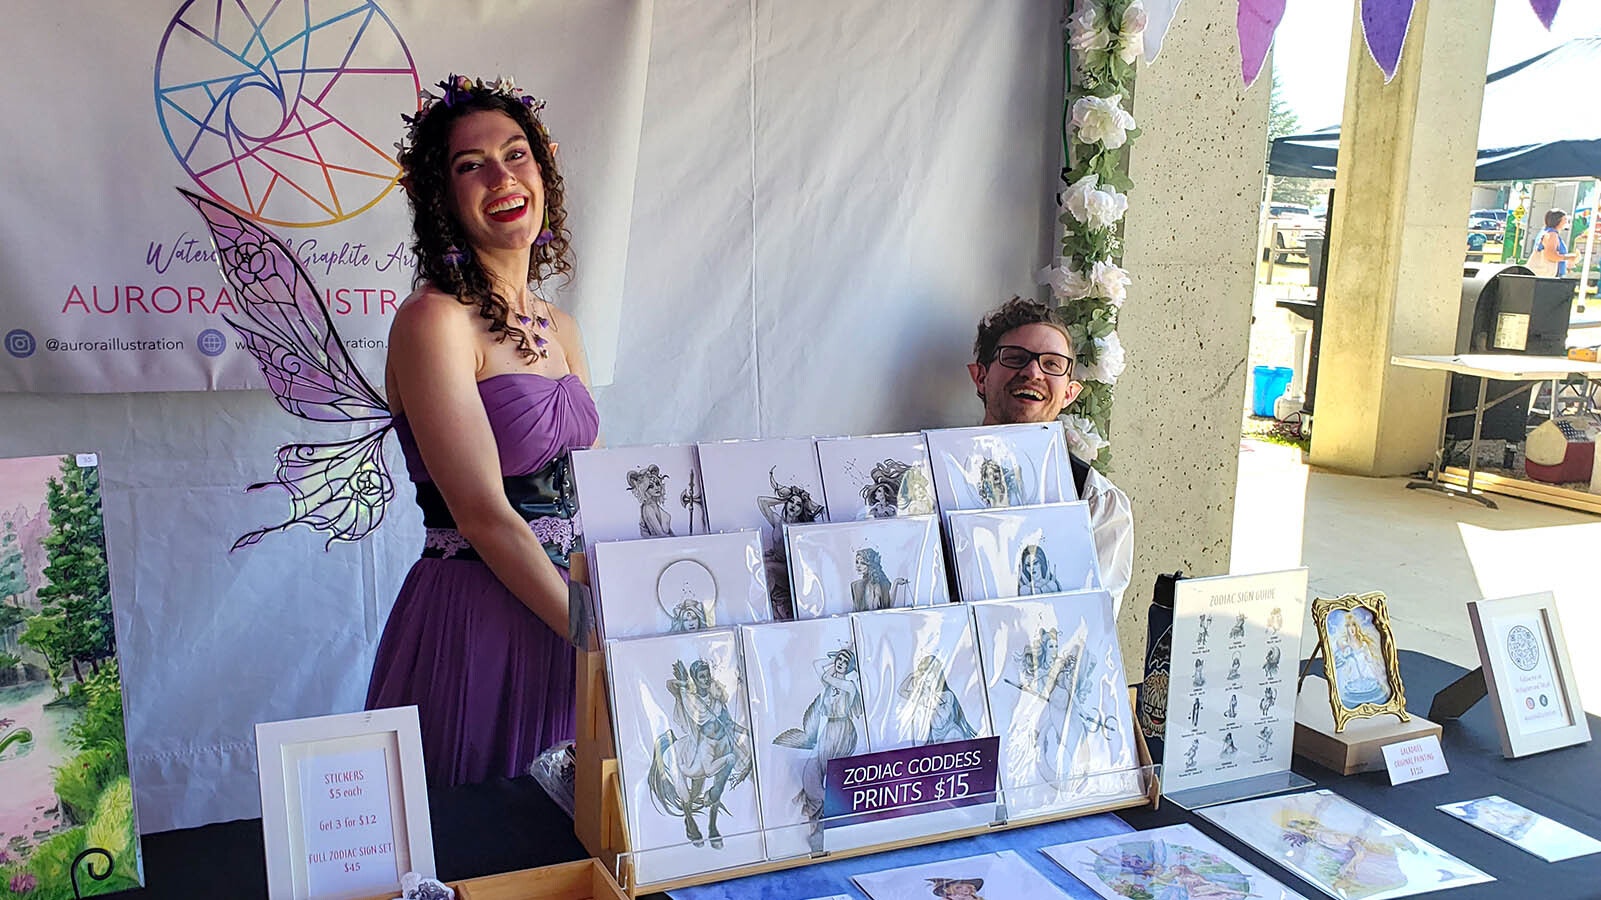 Jenna Canady center of South Dakota, a fantasy illustrator, was among vendors at the medieval market in Sheridan during the recent Tournament of Knights.